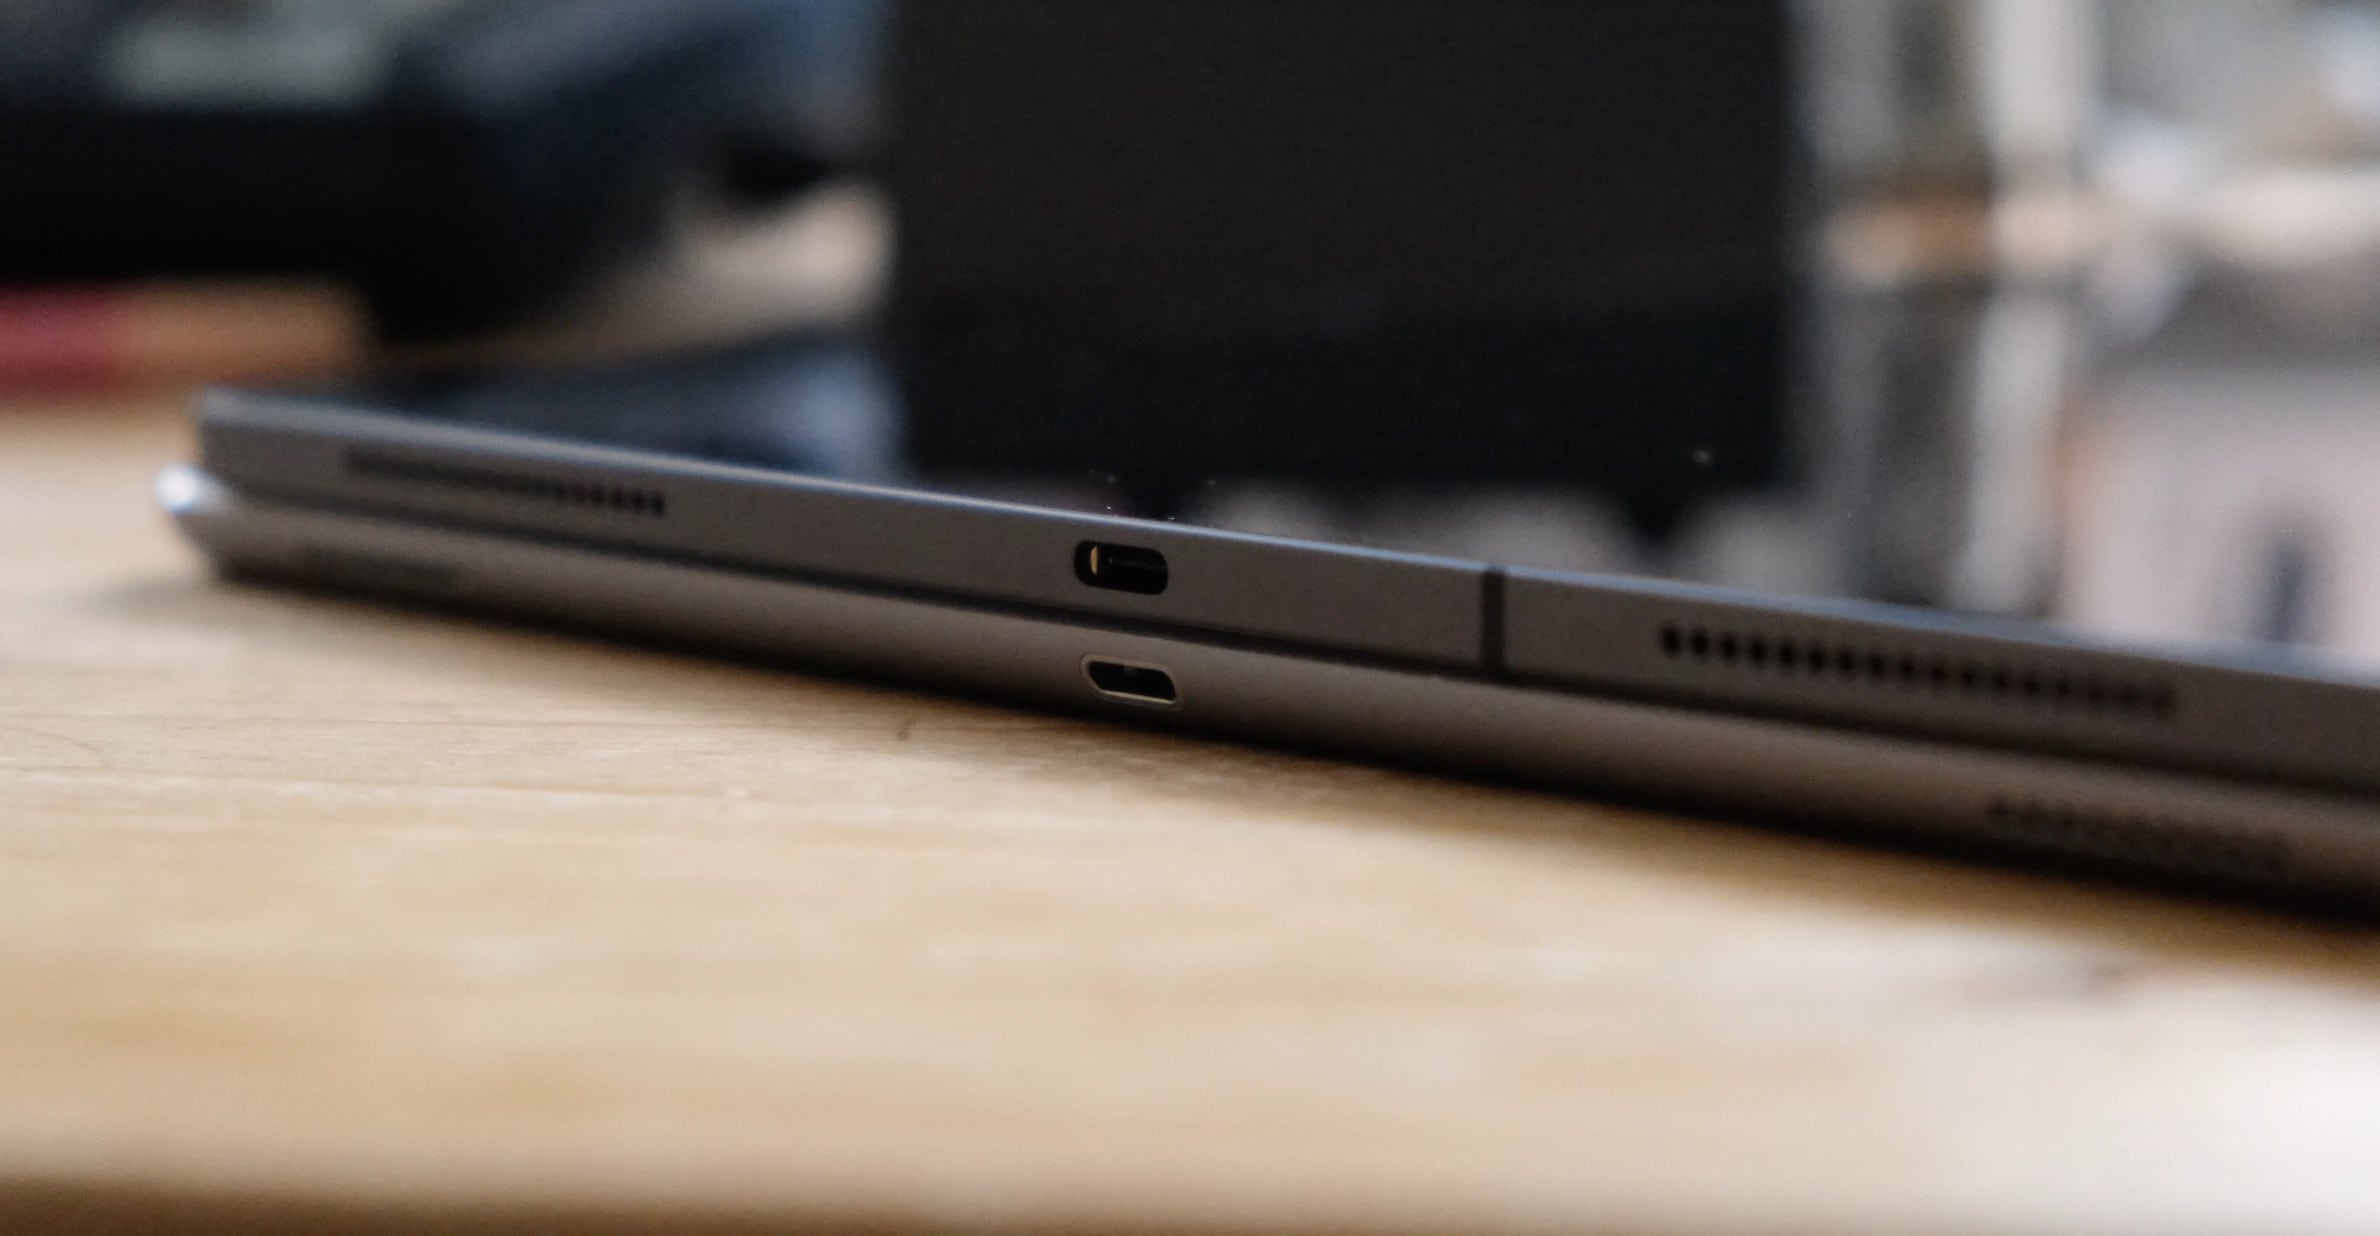 The new iPad Pro USB-C port is bigger, but probably better in the end.